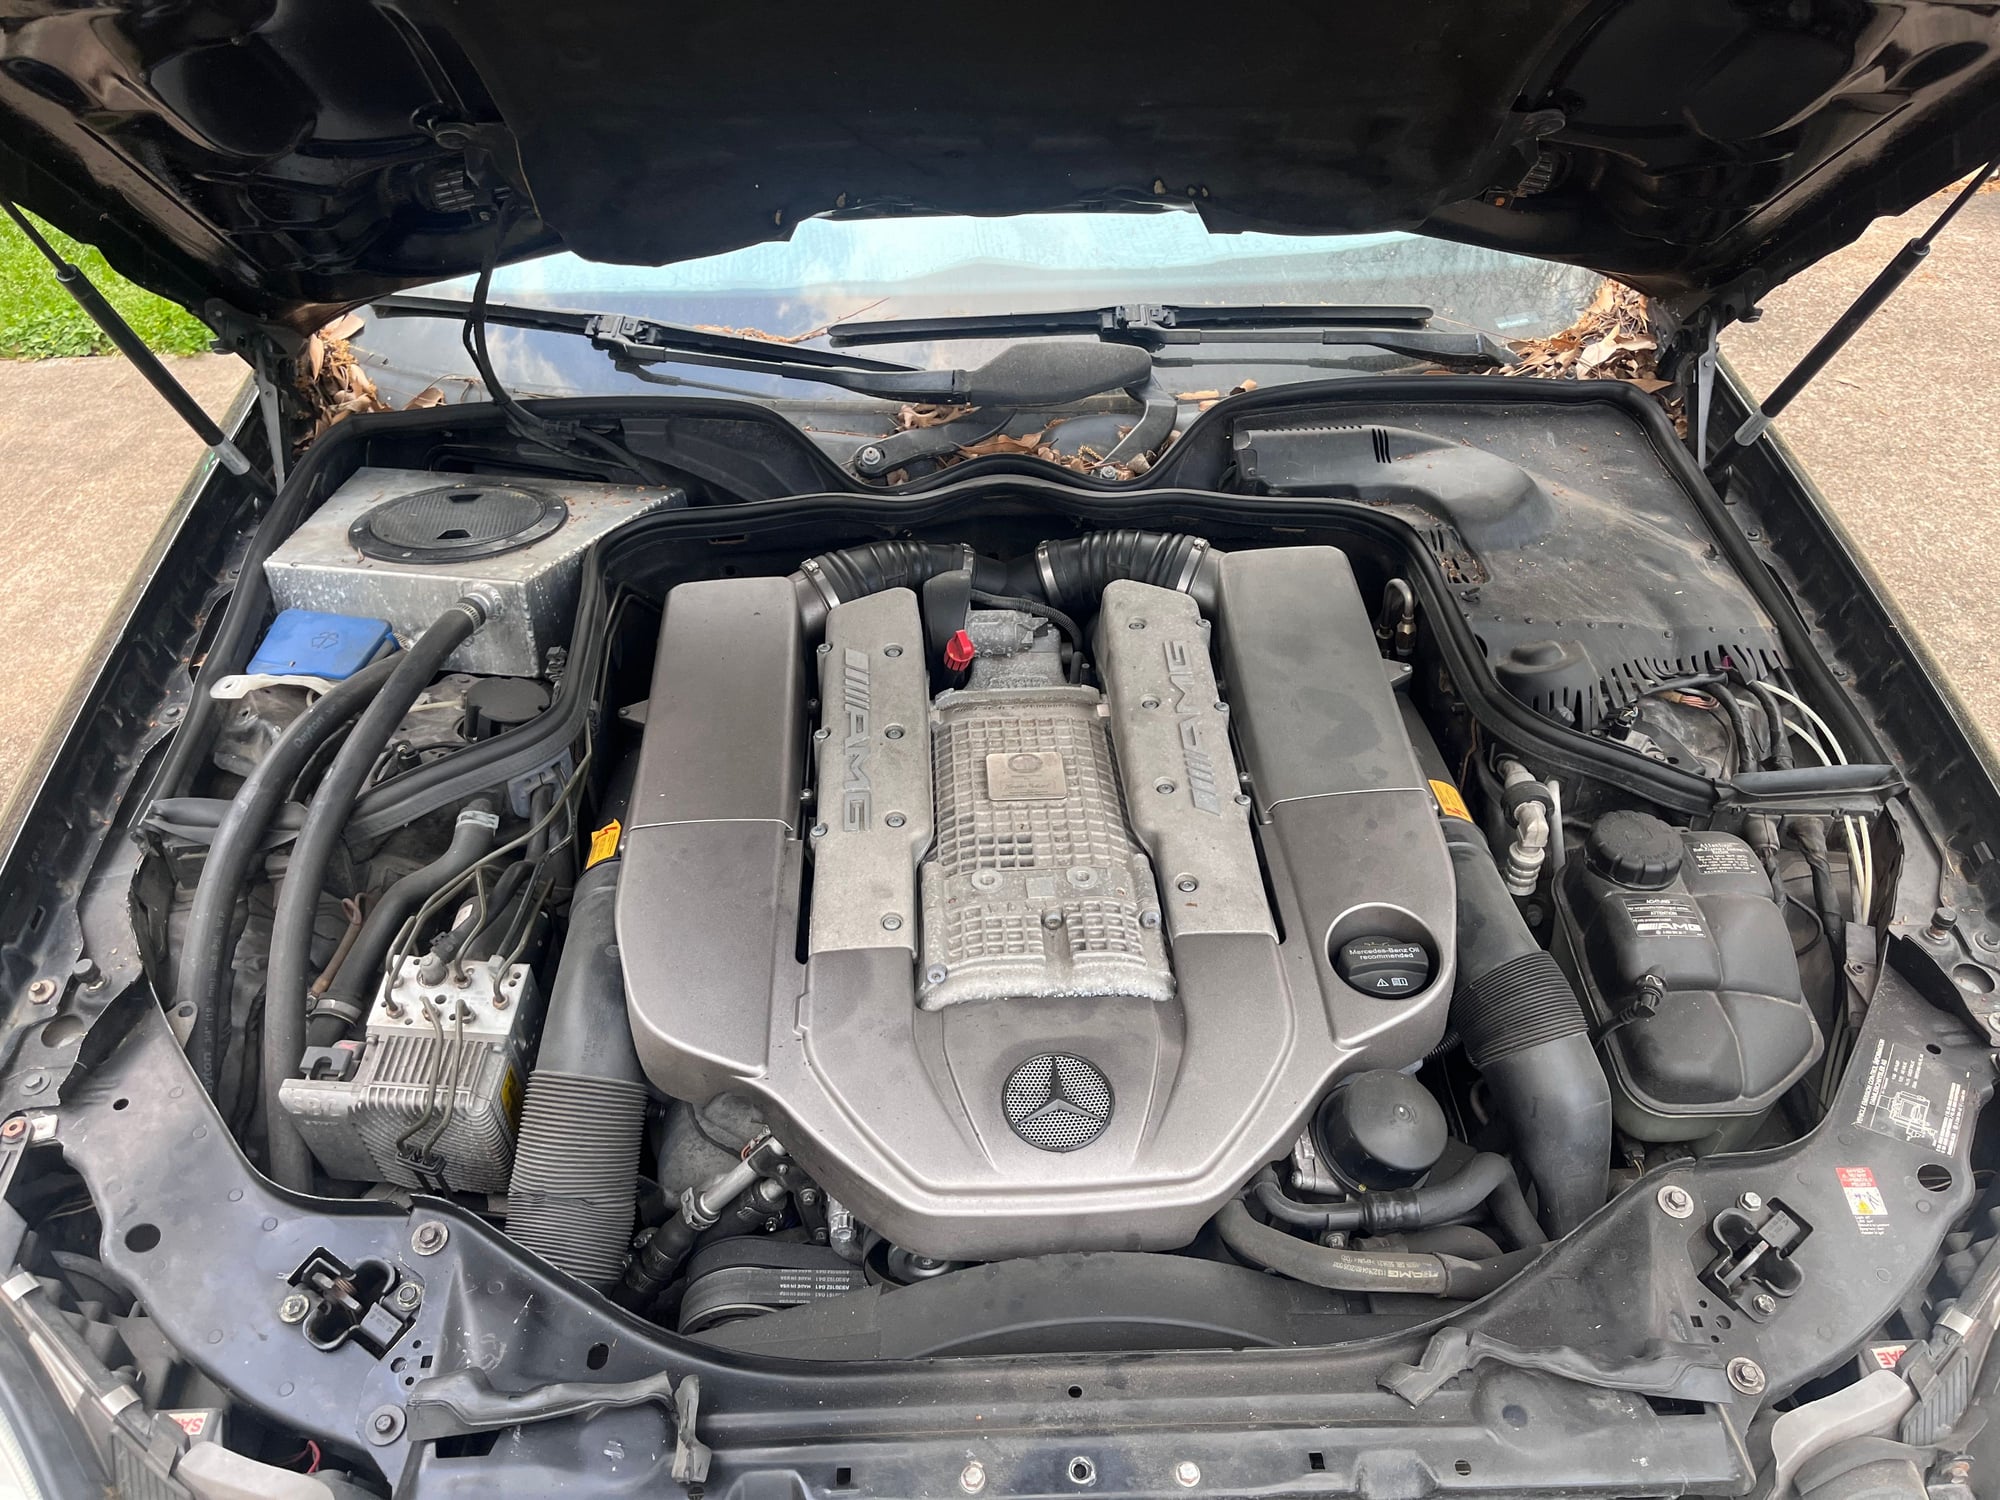 Engine - Complete - M113k 90k Miles Free Car Comes With It - Used - 2003 to 2011 Mercedes-Benz E55 AMG - All Years Mercedes-Benz S55 AMG - All Years Mercedes-Benz G55 AMG - All Years Mercedes-Benz SL55 AMG - Houston, TX 77001, United States